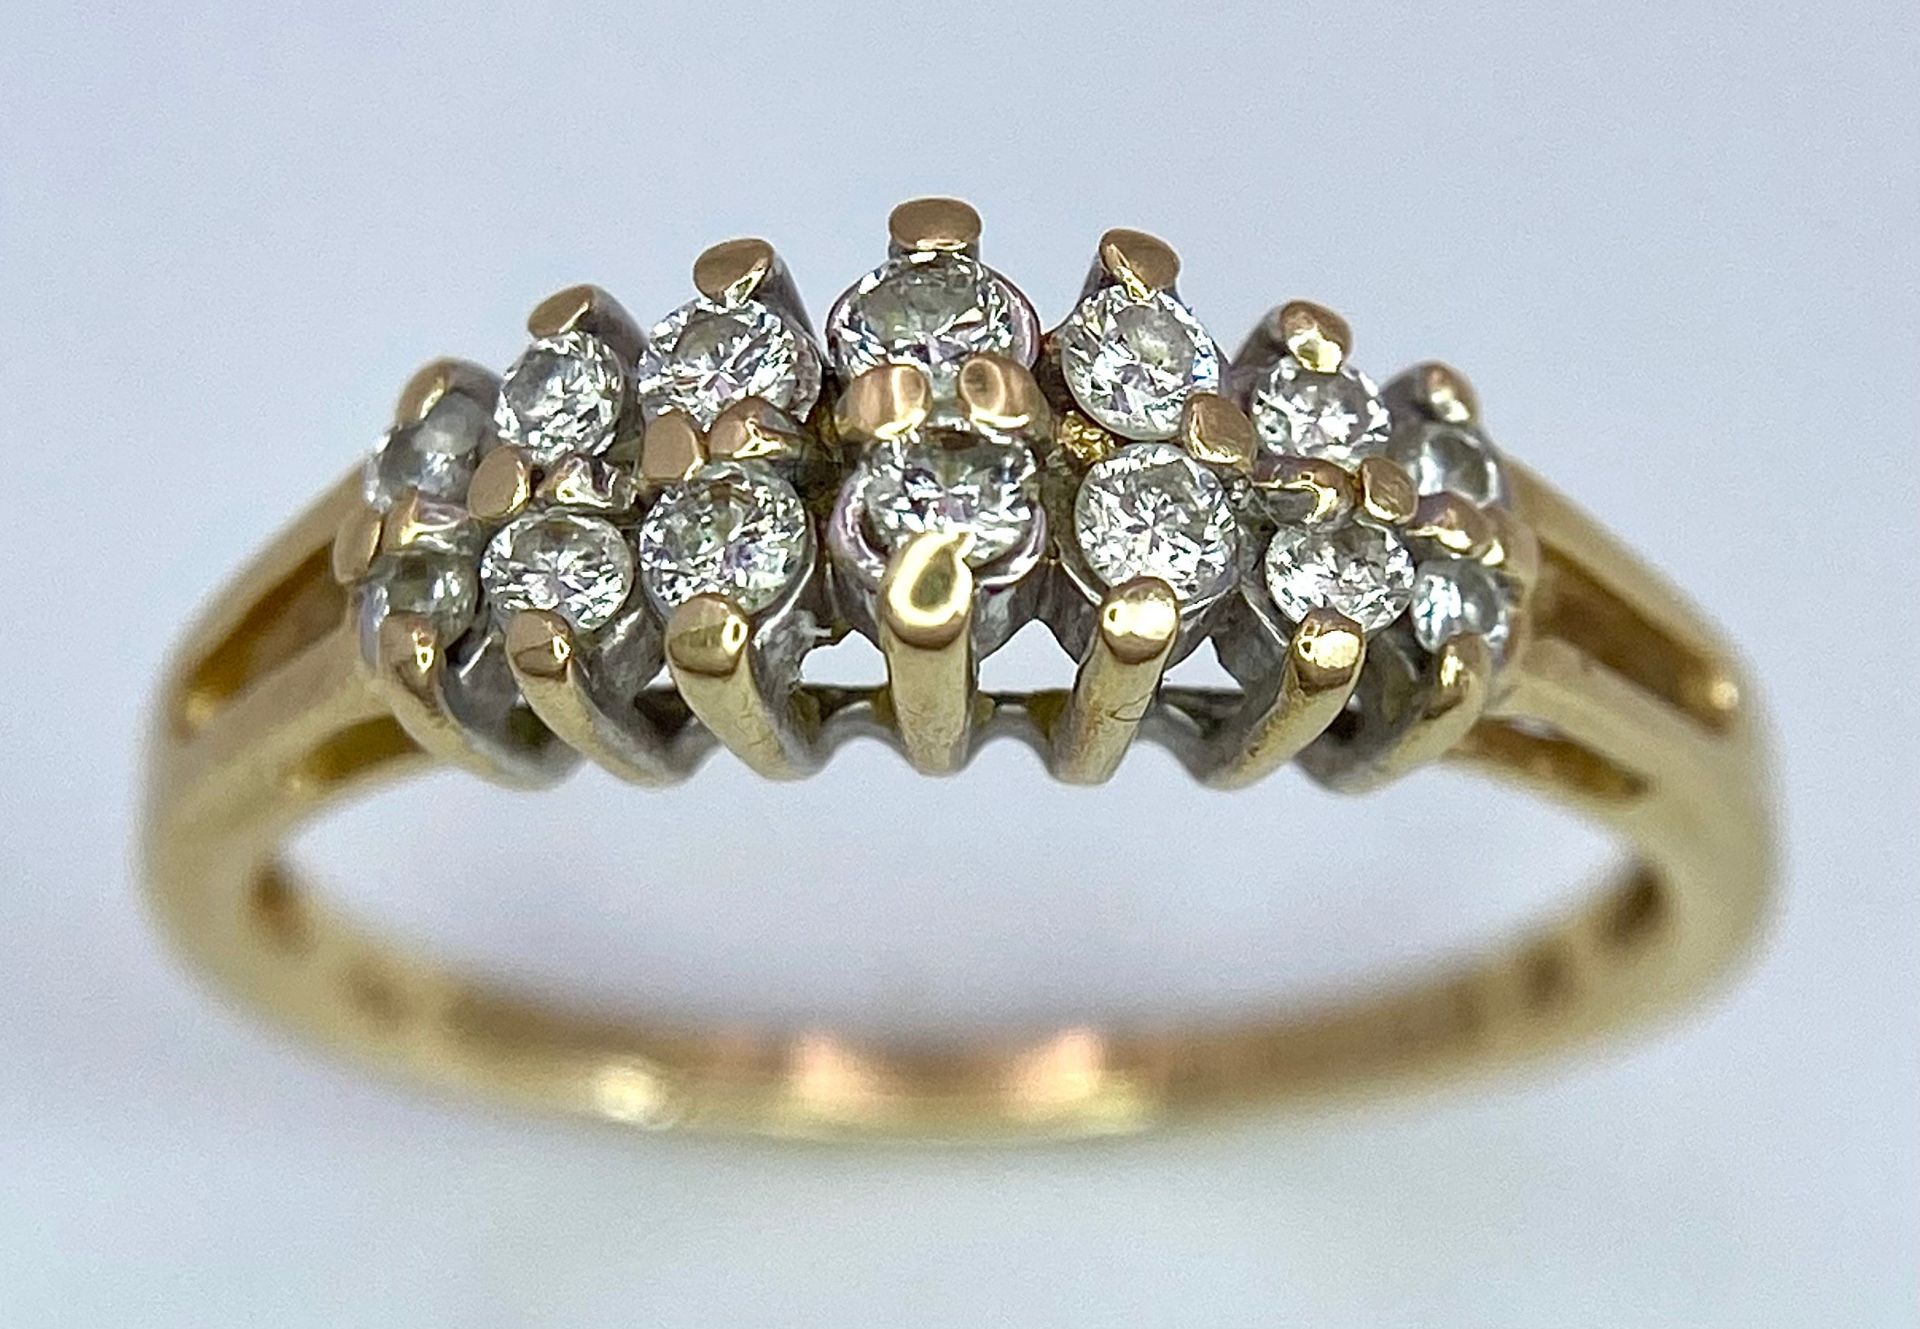 A 14K YELLOW GOLD 2 ROW DIAMOND RING. 0.25ctw, size N, 2.3g total weight. Ref: SC 9029